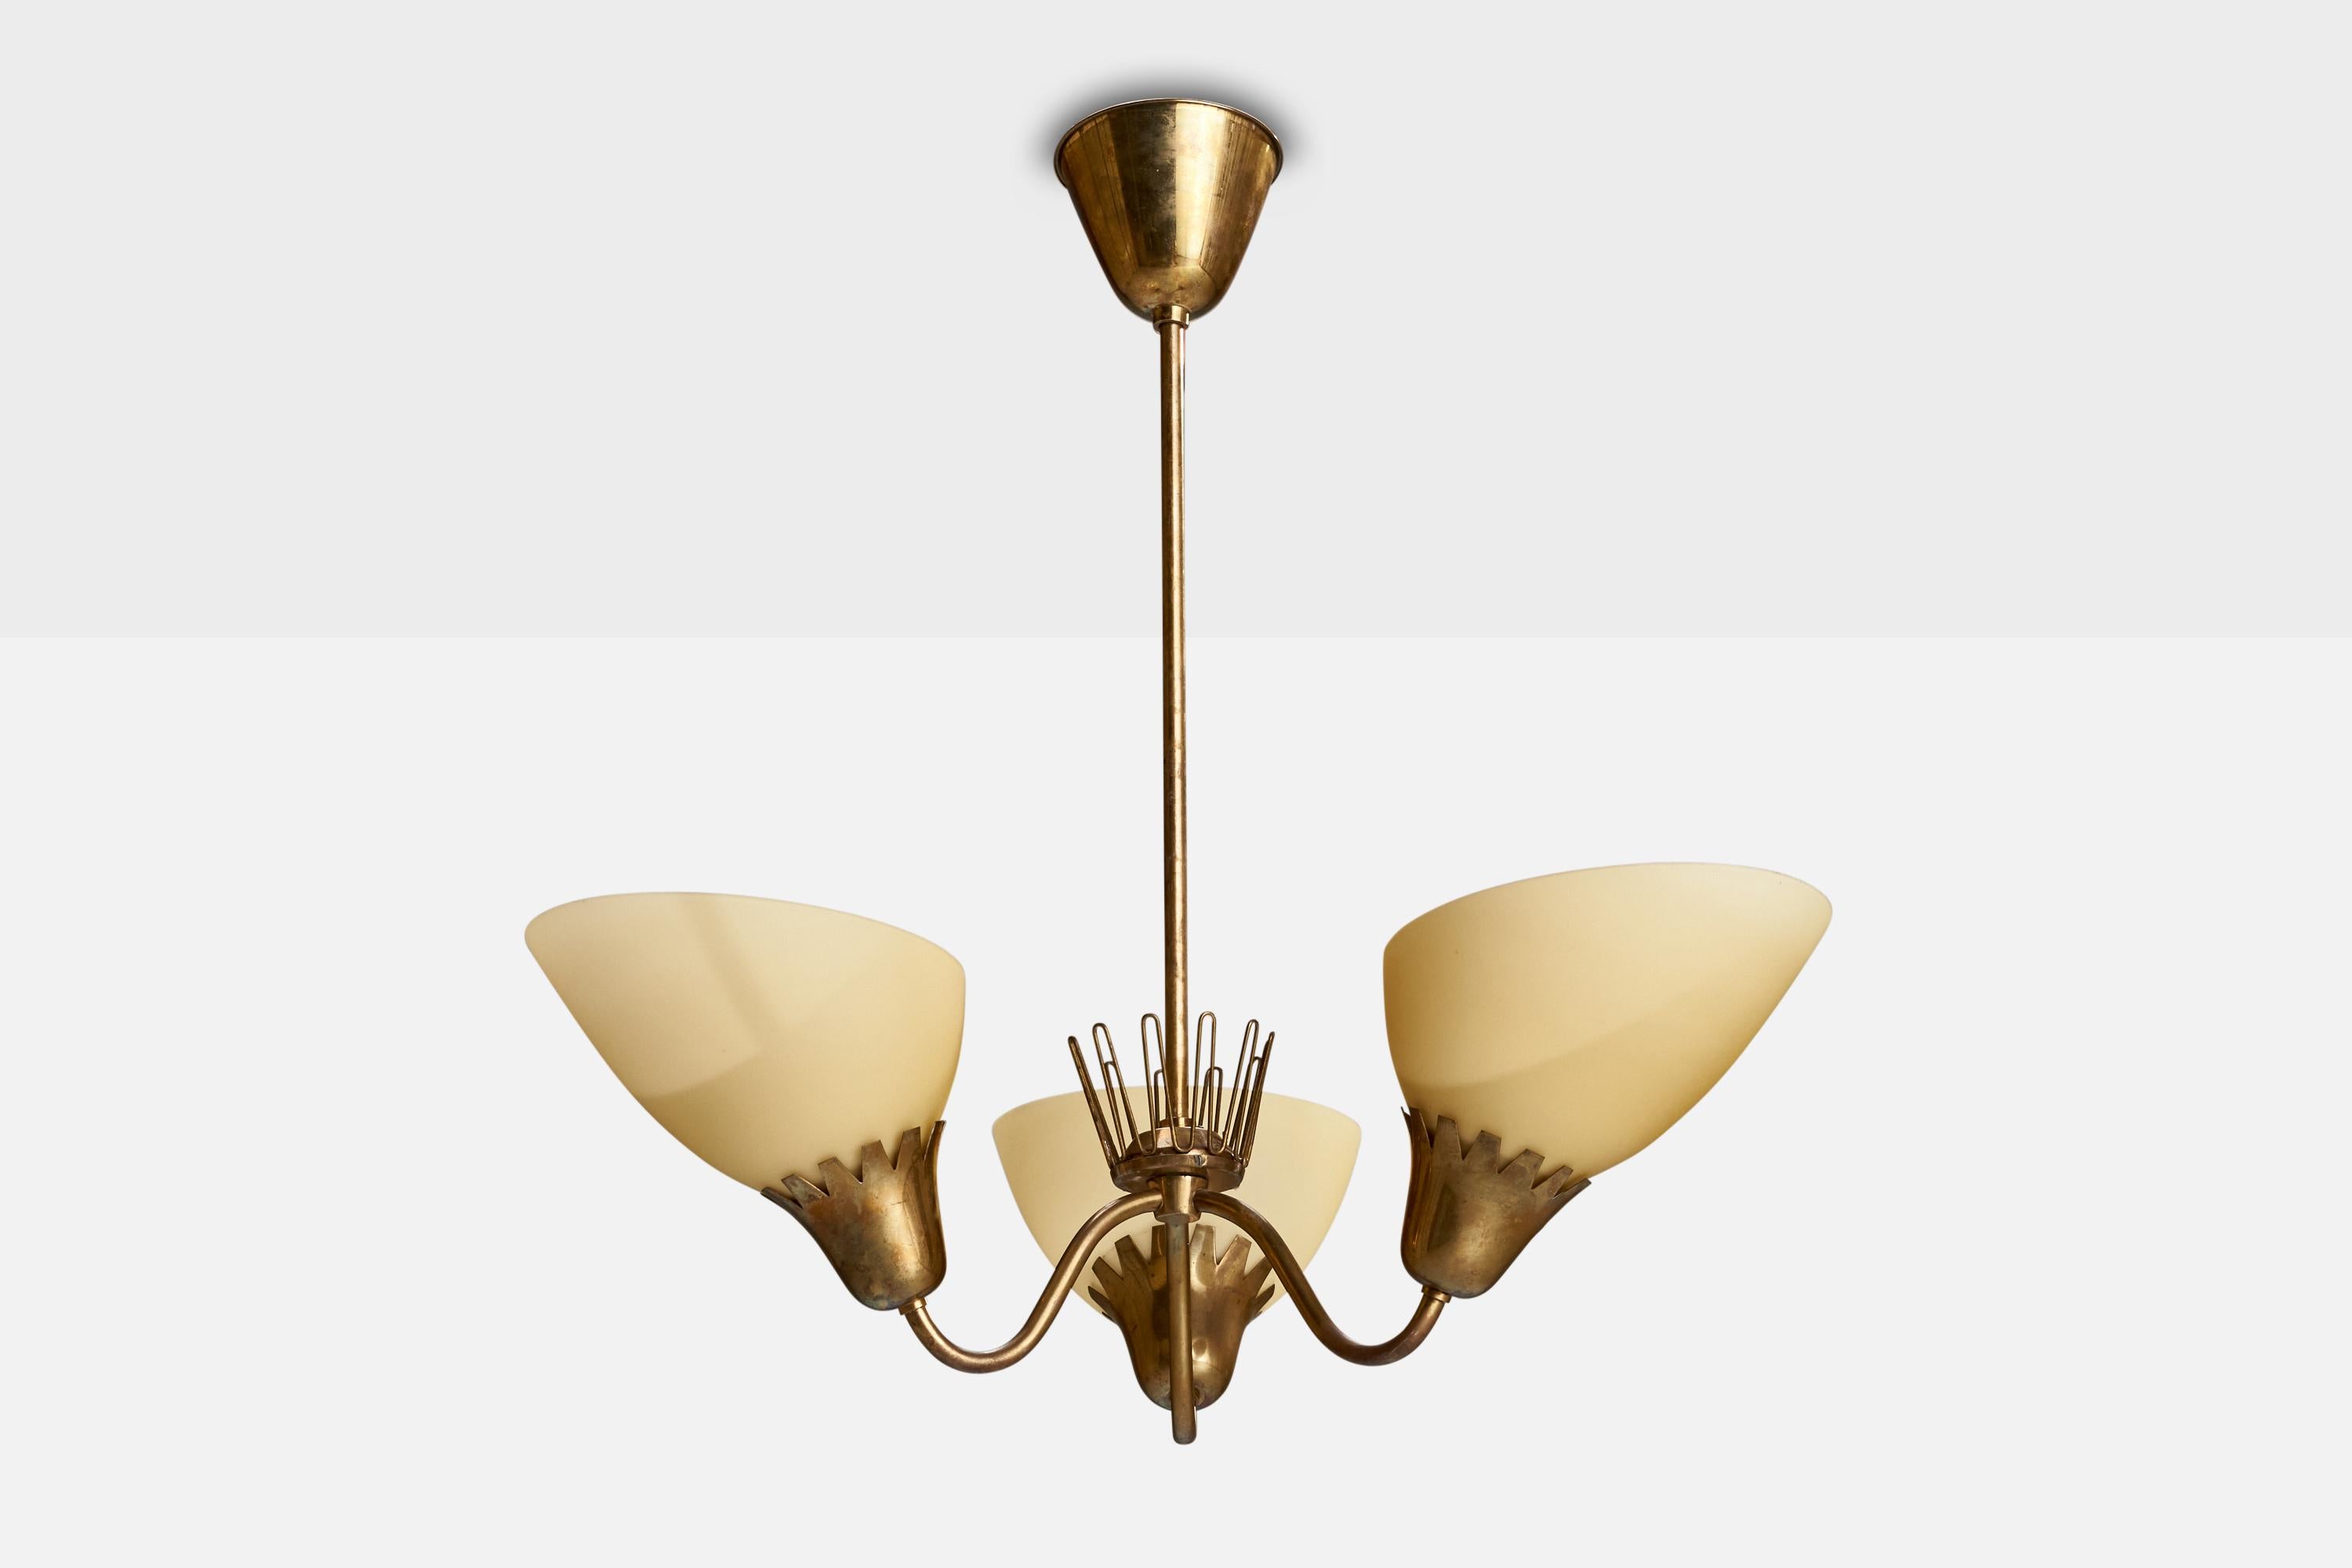 A brass and beige glass chandelier produced by ASEA, Sweden, 1940s.﻿

Dimensions of canopy (inches): 3.52” H x 4.04” Diameter
Socket takes standard E-26 bulbs. 3 socket.There is no maximum wattage stated on the fixture. All lighting will be